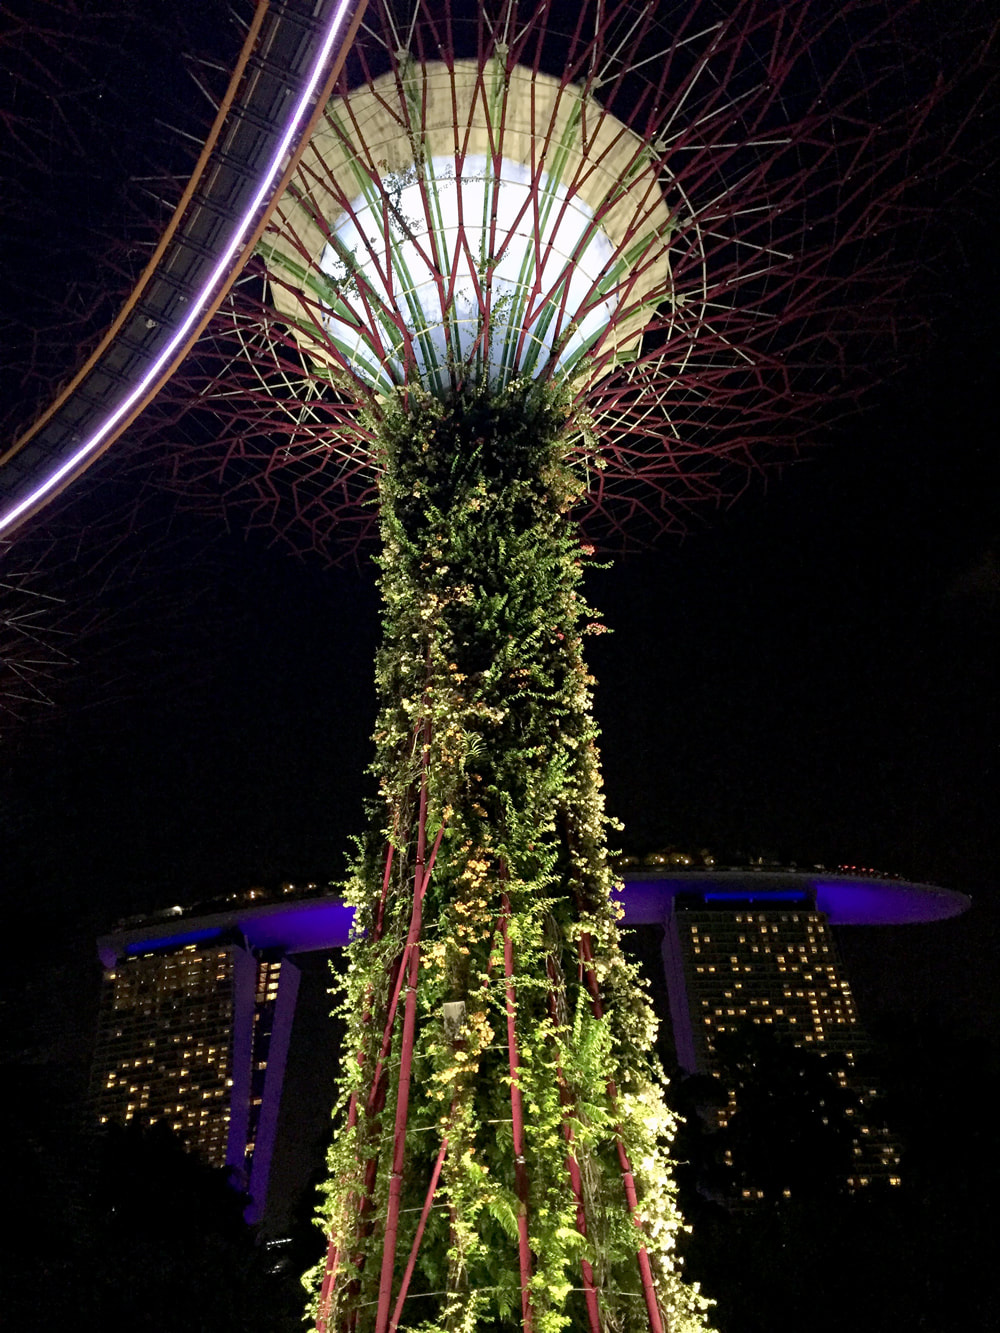 The OCBC Skyway and a Supertree at Gardens by the Bay appearing to tower over the Marina Bay Sands Hotel. Singapore.